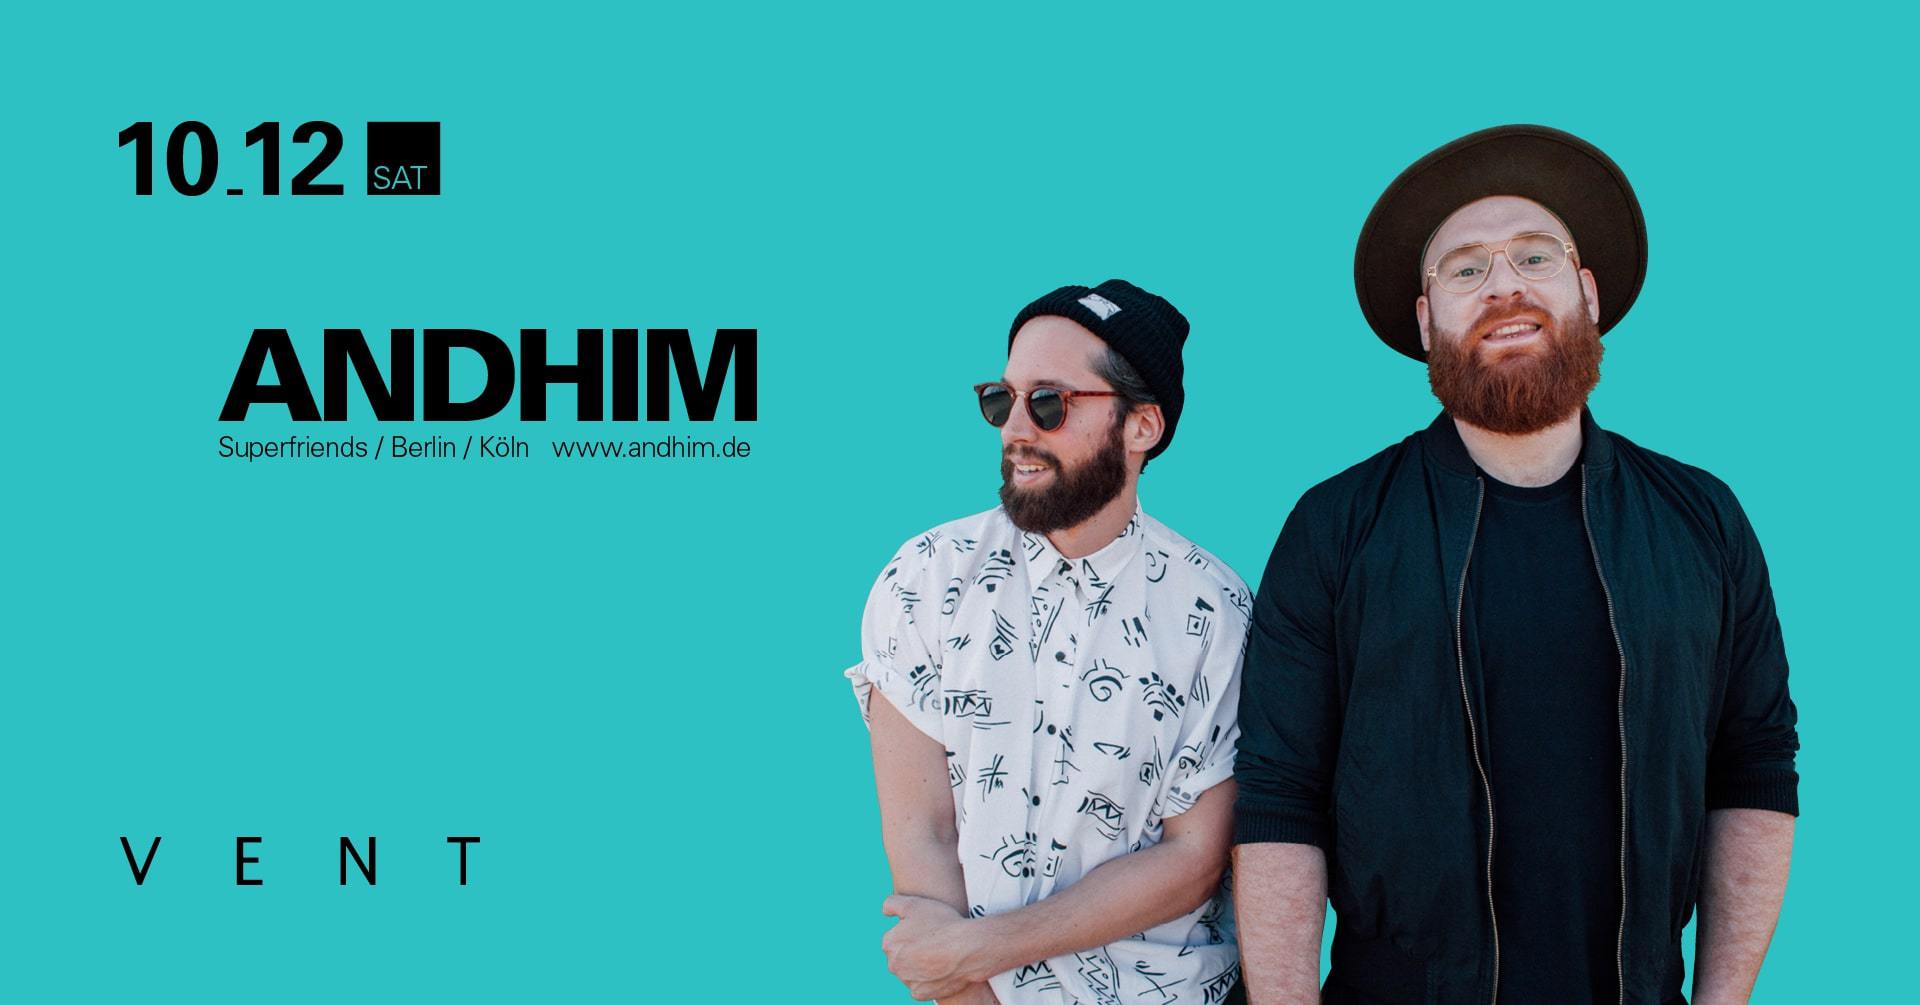 DJ Koze and Solomun, Andhim, they are bringing their crazy antics to VENT in Tokyo